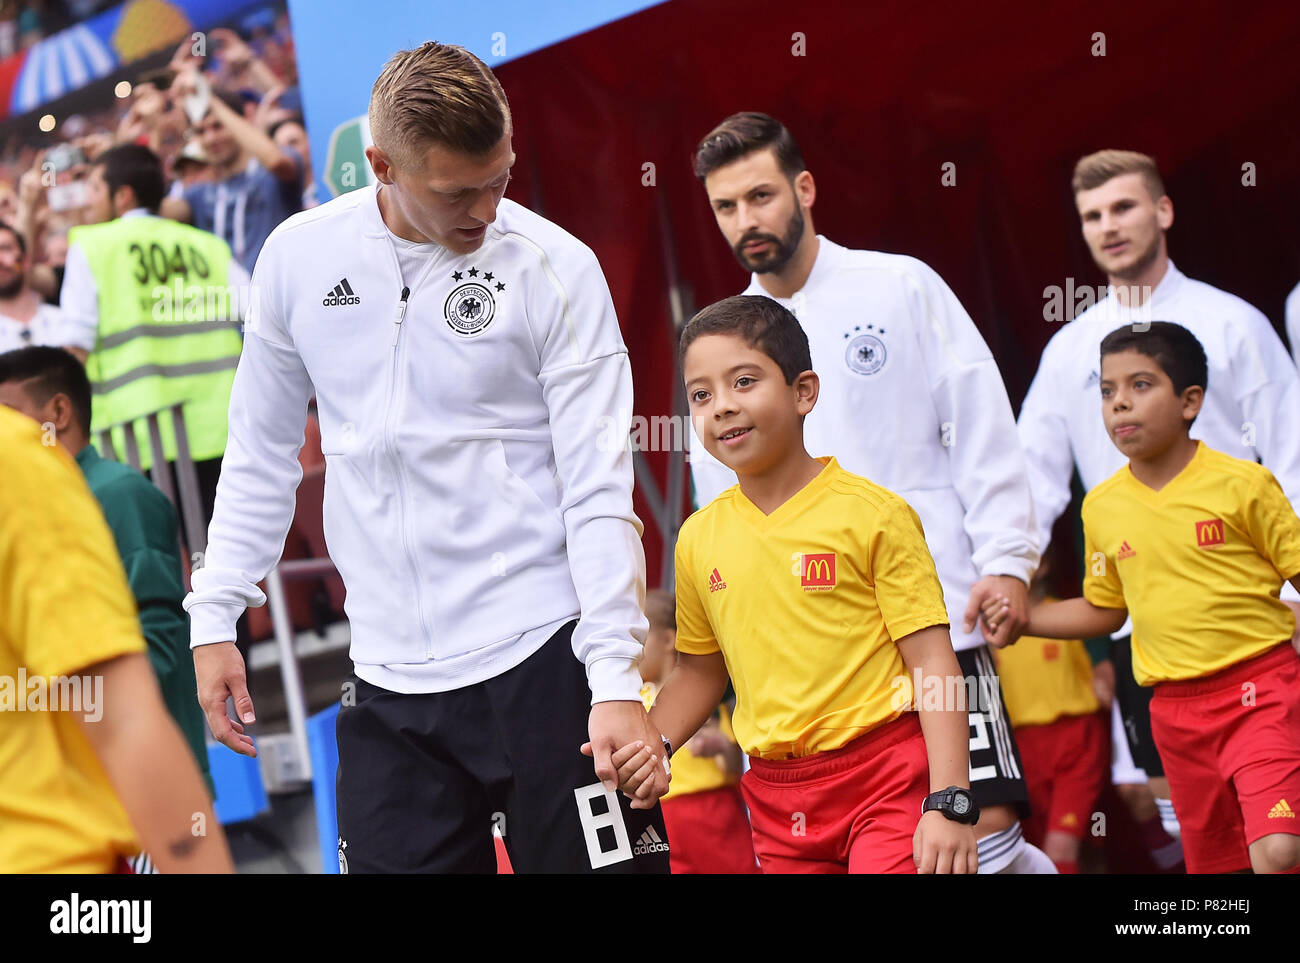 MOSCOW, RUSSIA - JUNE 17: Toni Kroos of Germany during the 2018 FIFA World Cup Russia group F match between Germany and Mexico at Luzhniki Stadium on June 17, 2018 in Moscow, Russia. (Photo by Lukasz Laskowski/PressFocus/MB Media) Stock Photo